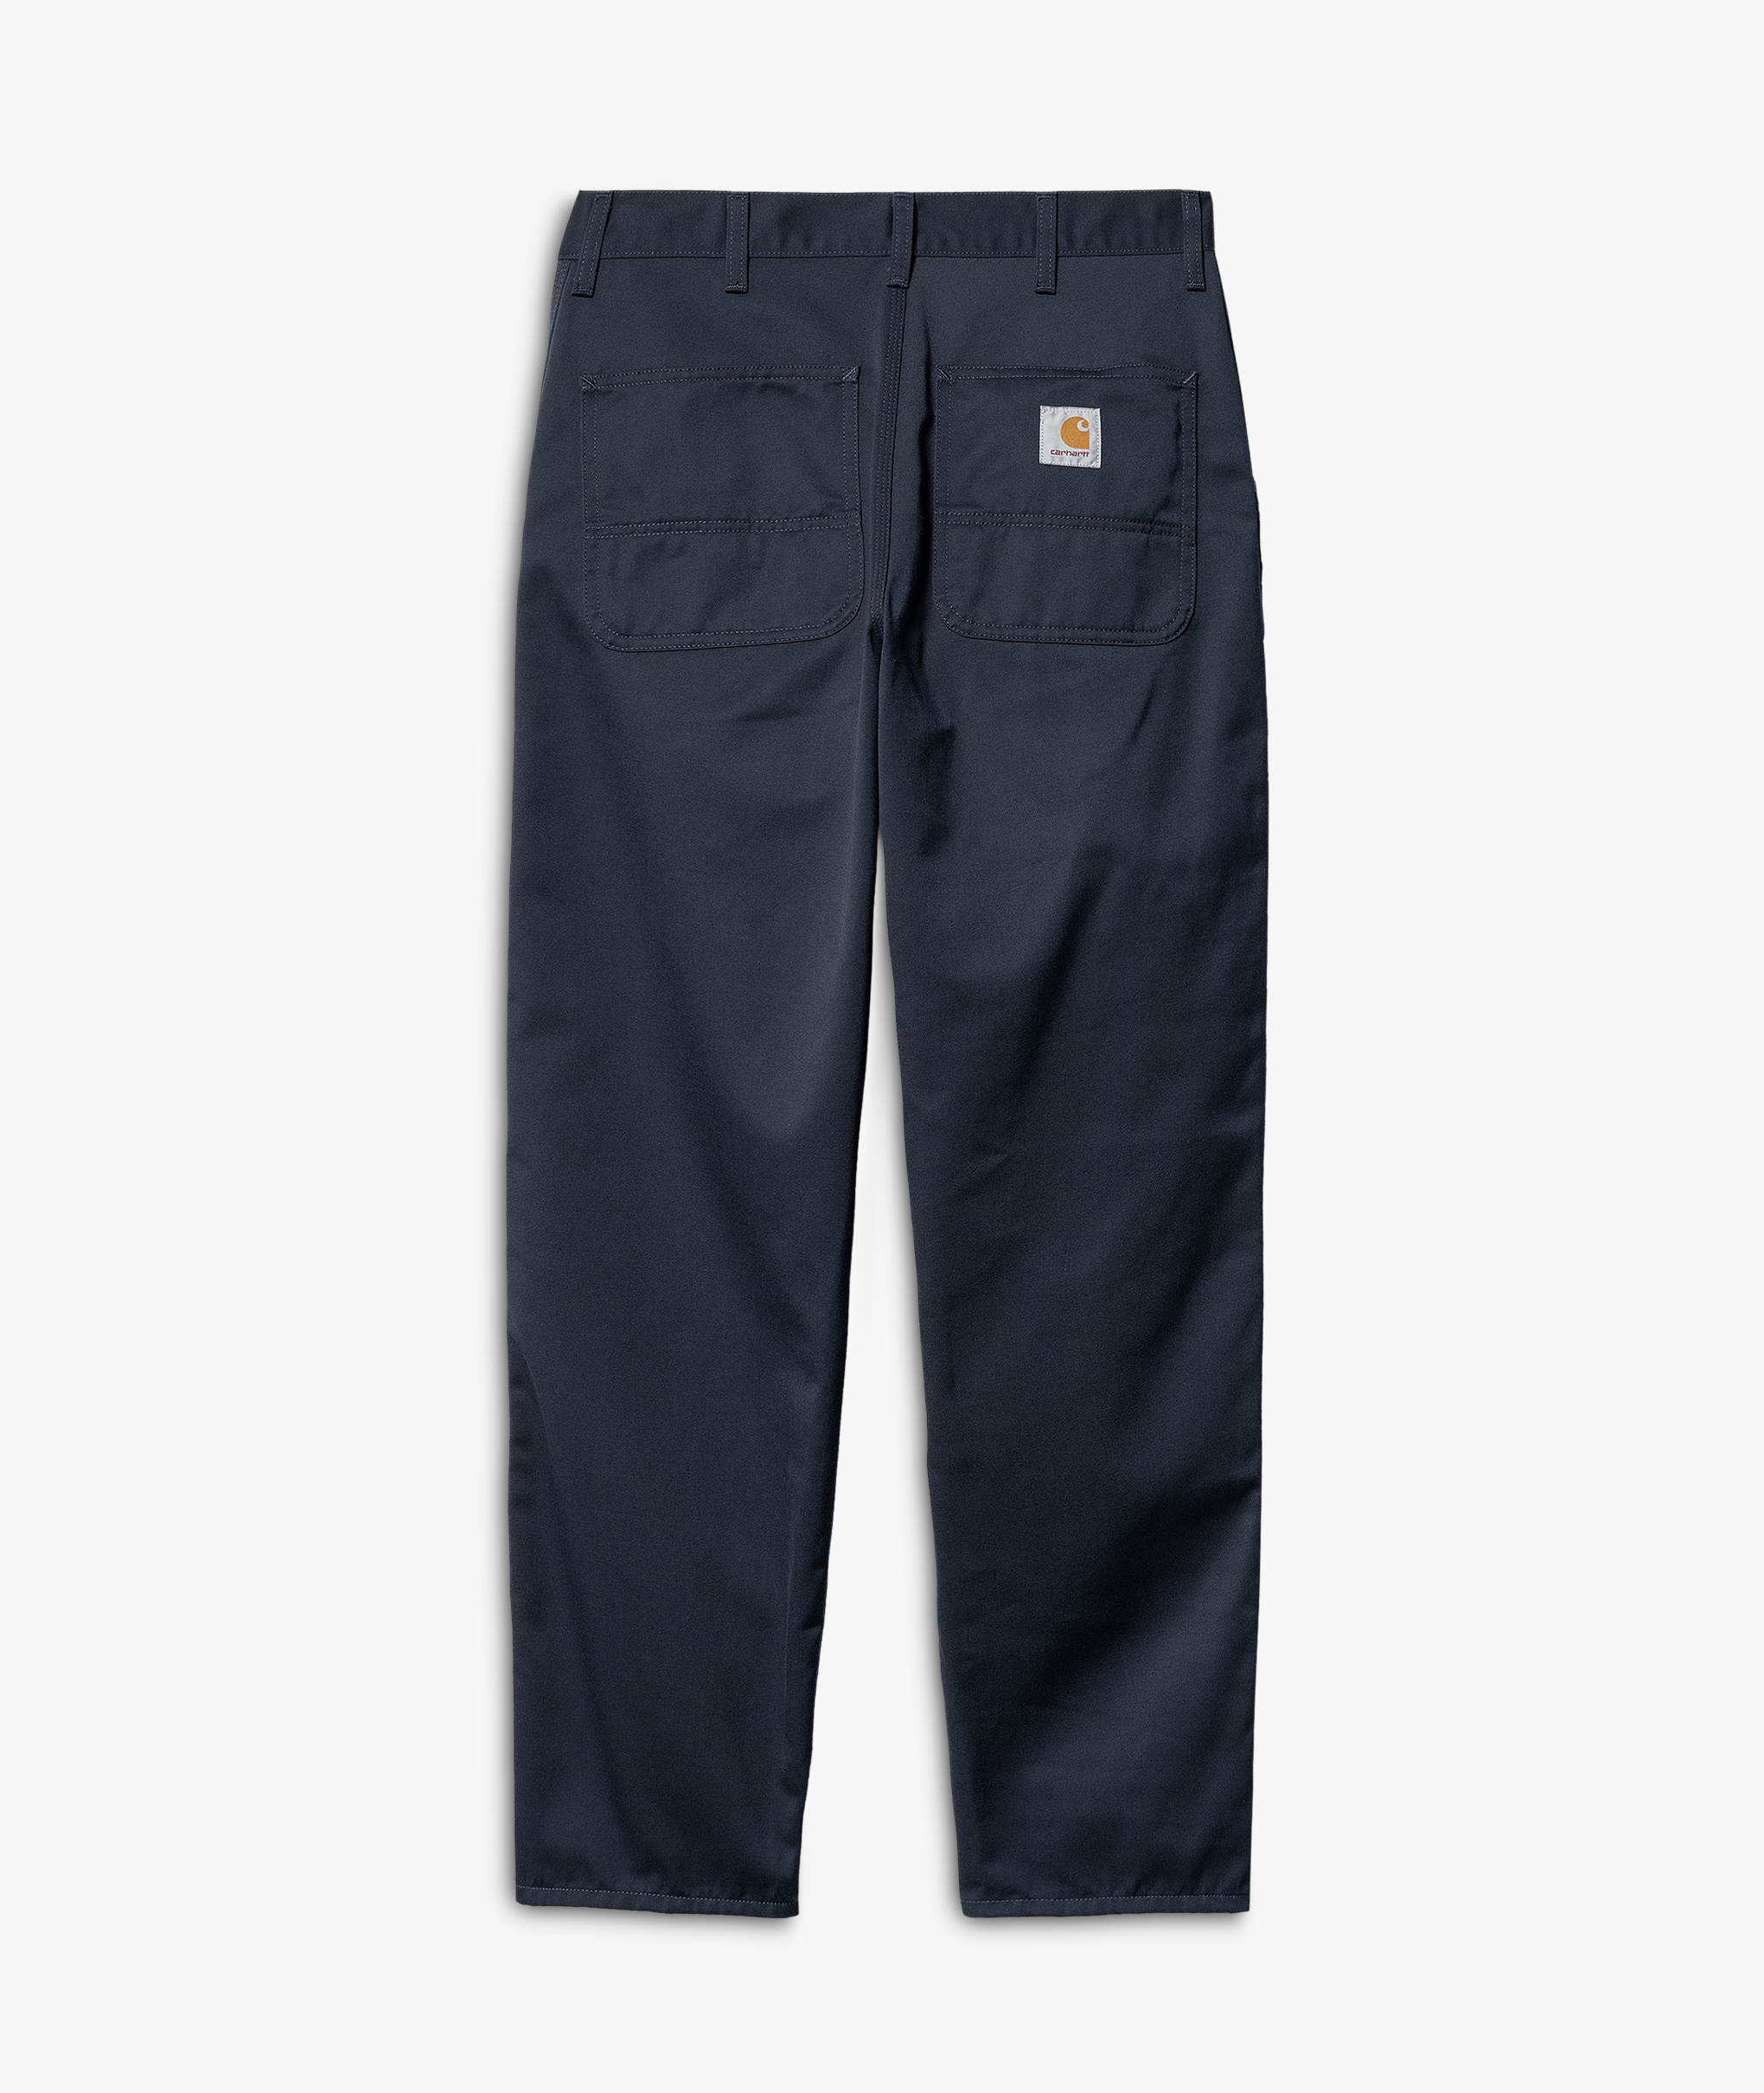 Norse Store  Shipping Worldwide - Carhartt WIP Simple Pant - Dark Navy